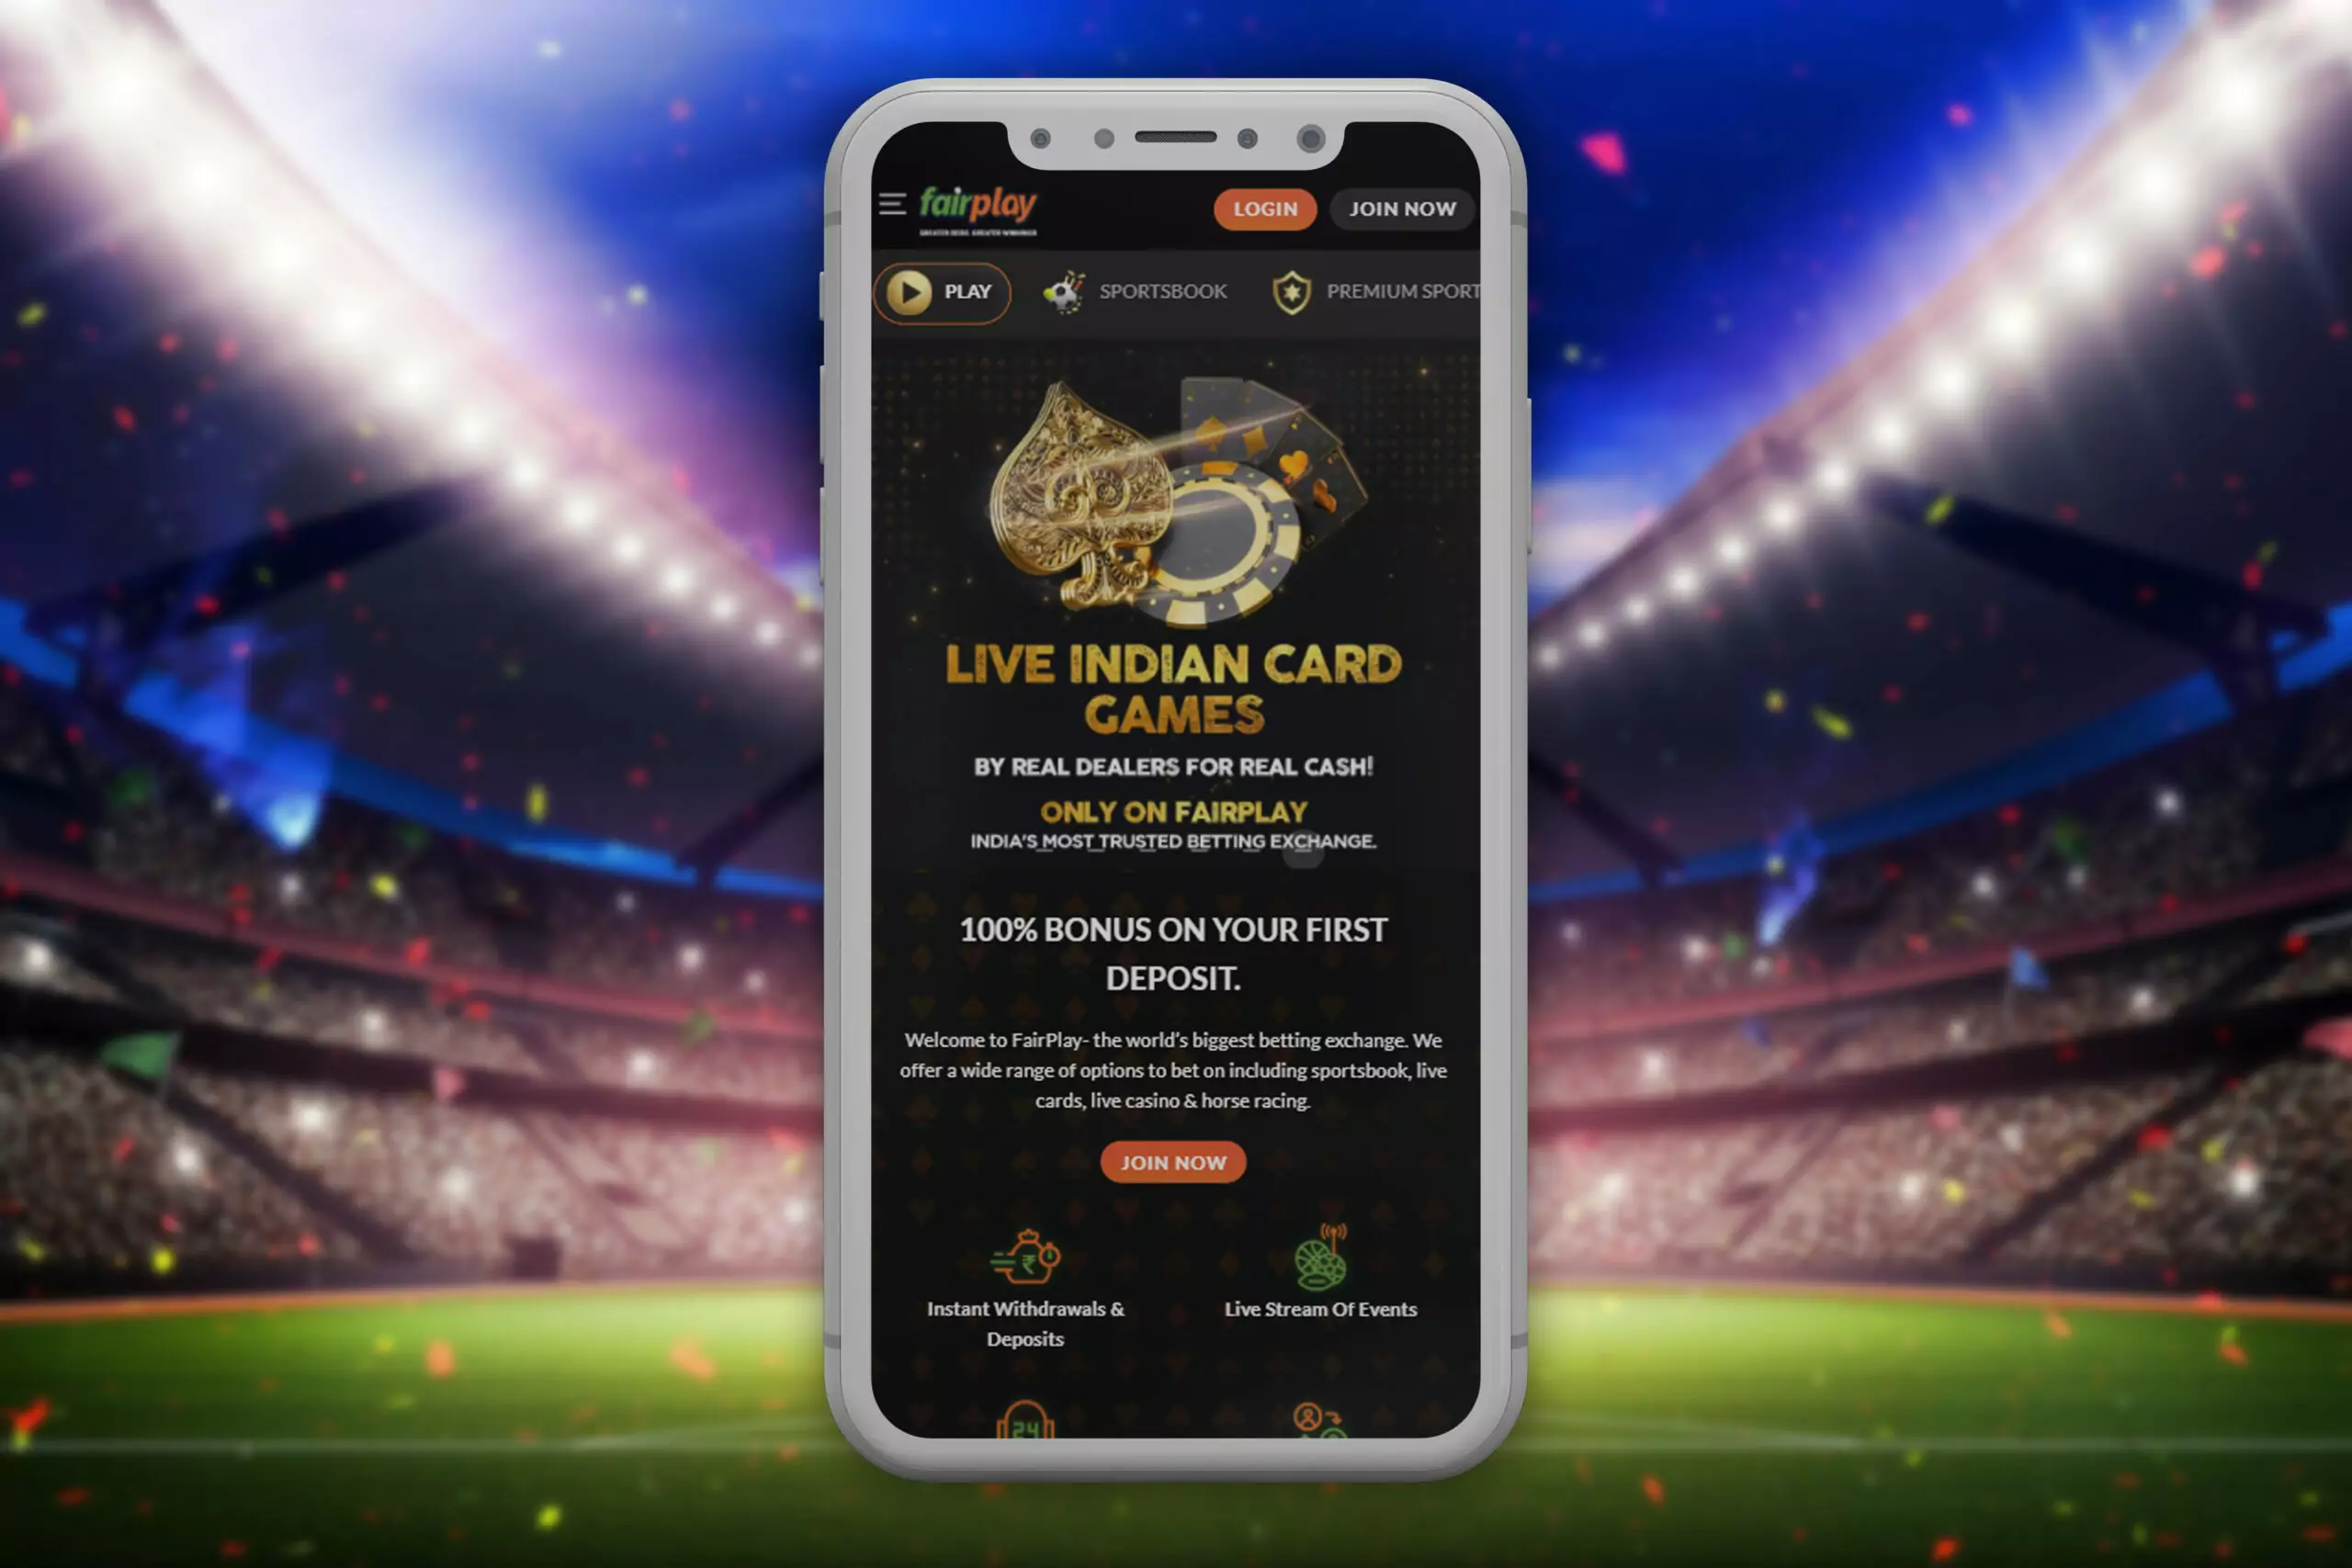 The Fairplay app is great for online sports betting enthusiasts.